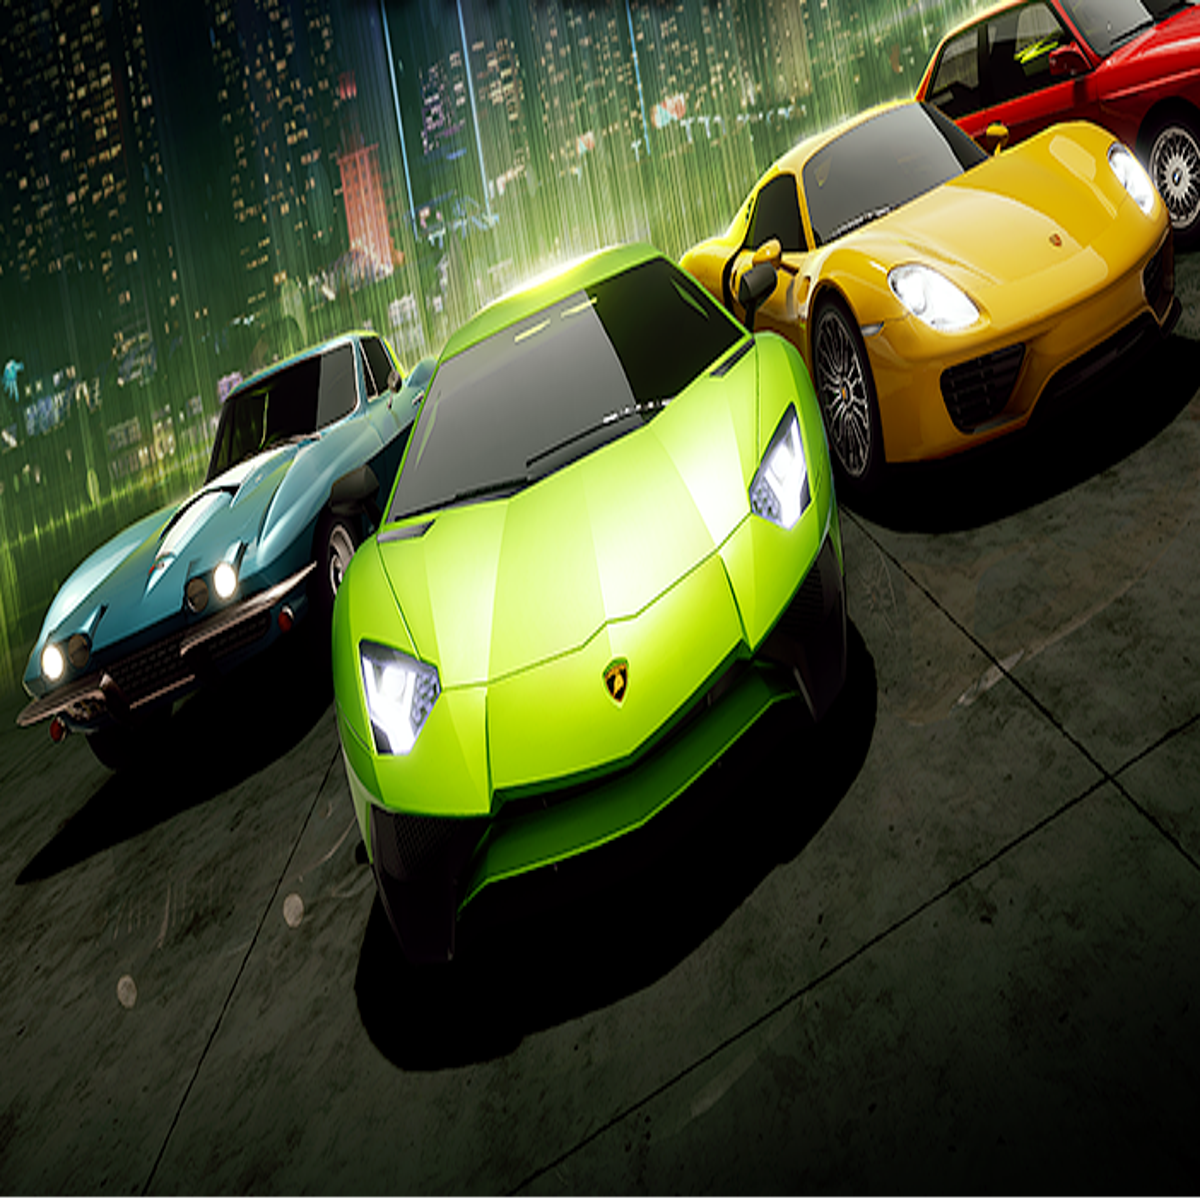 Microsoft launches Forza Street free-to-play game on Android, iOS